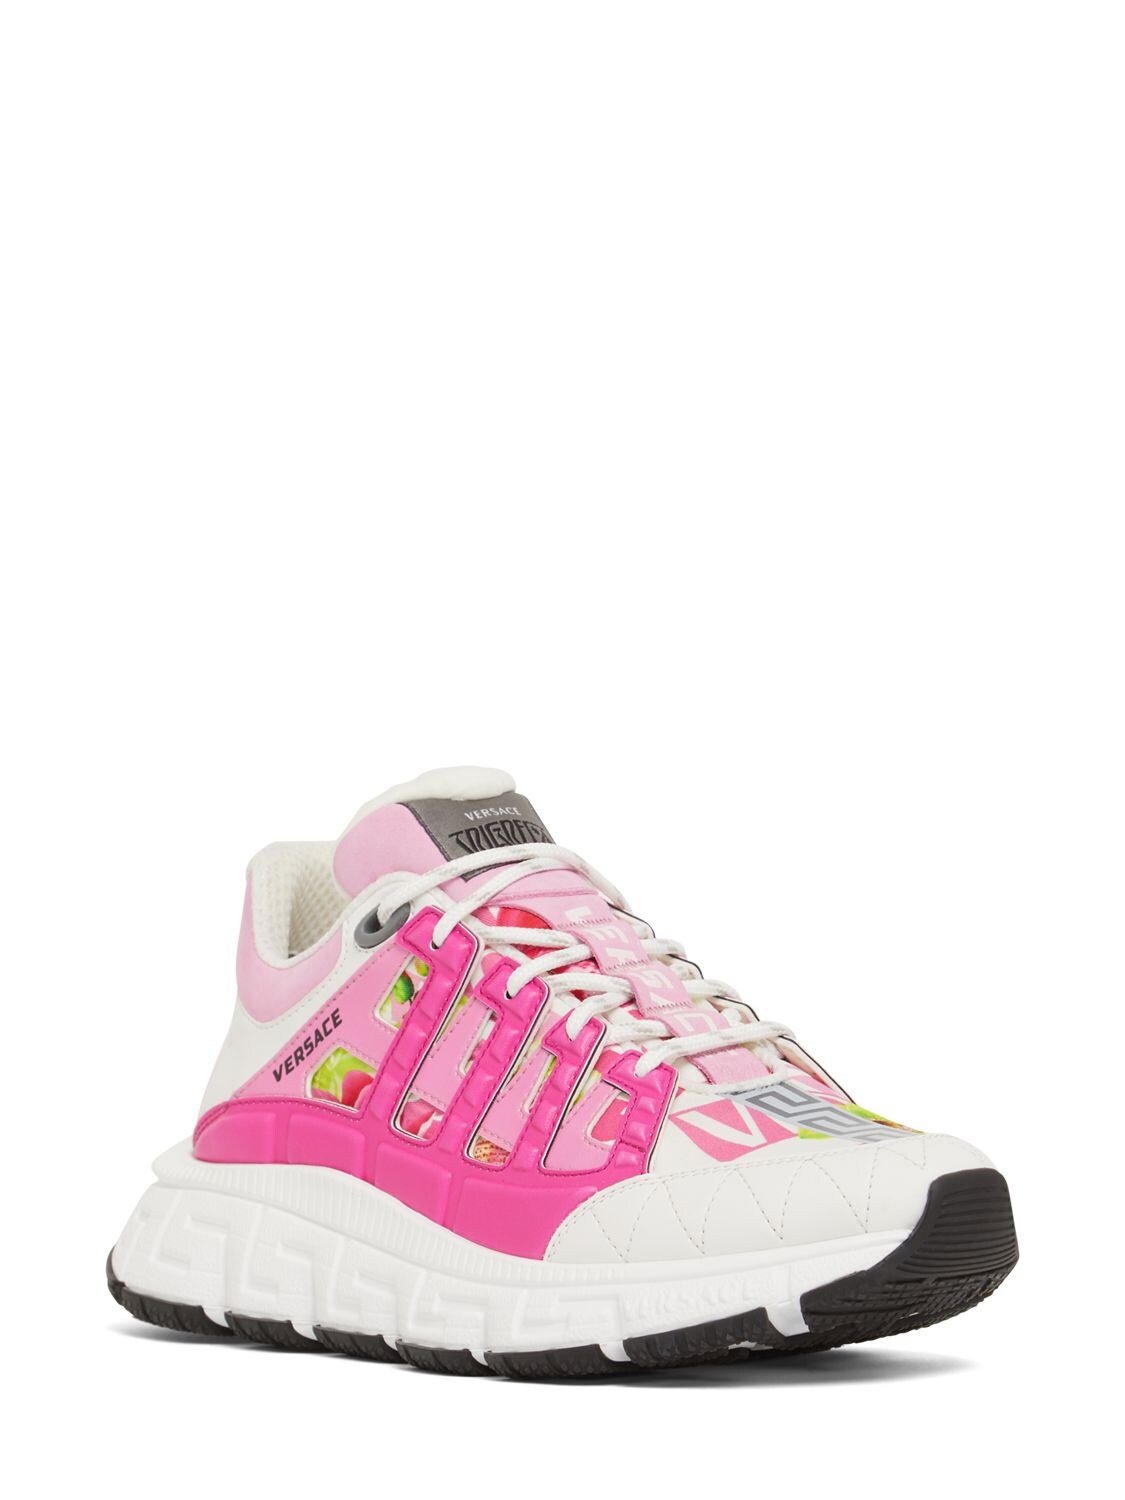 Versace Trigreca Colorblock Fashion Trainer Sneakers In Pink | ModeSens